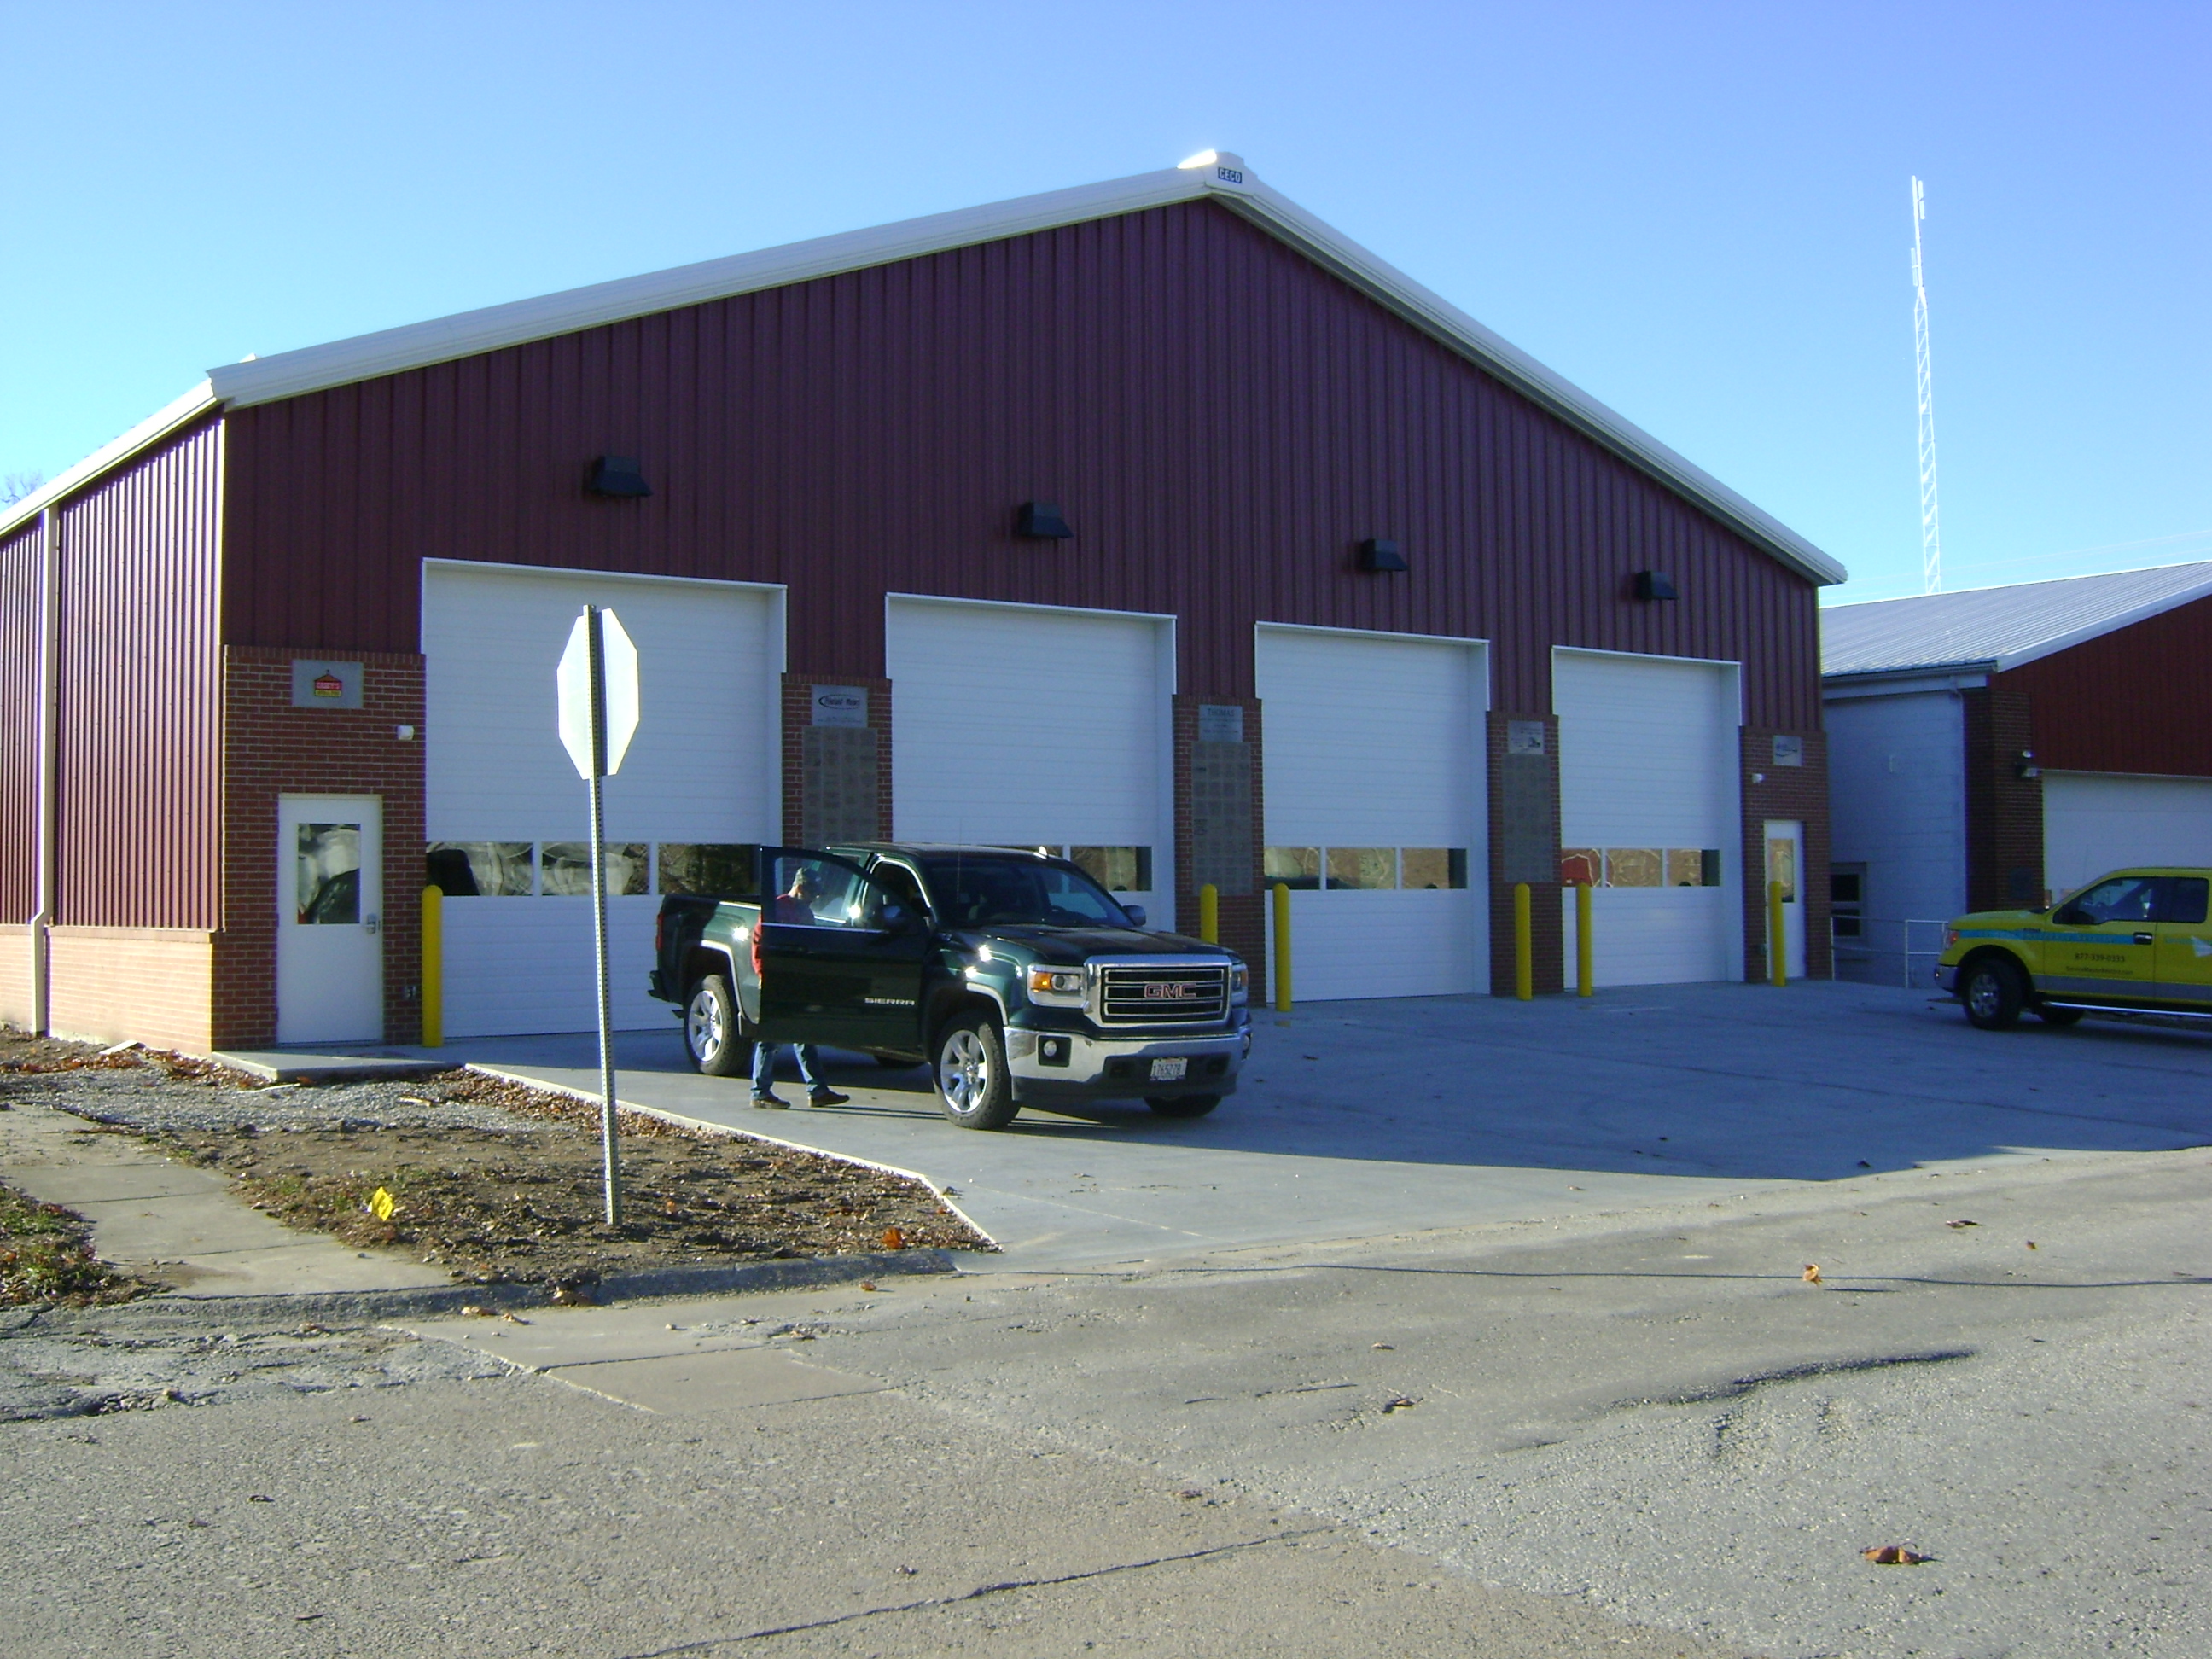 Pittsfield Fire Department